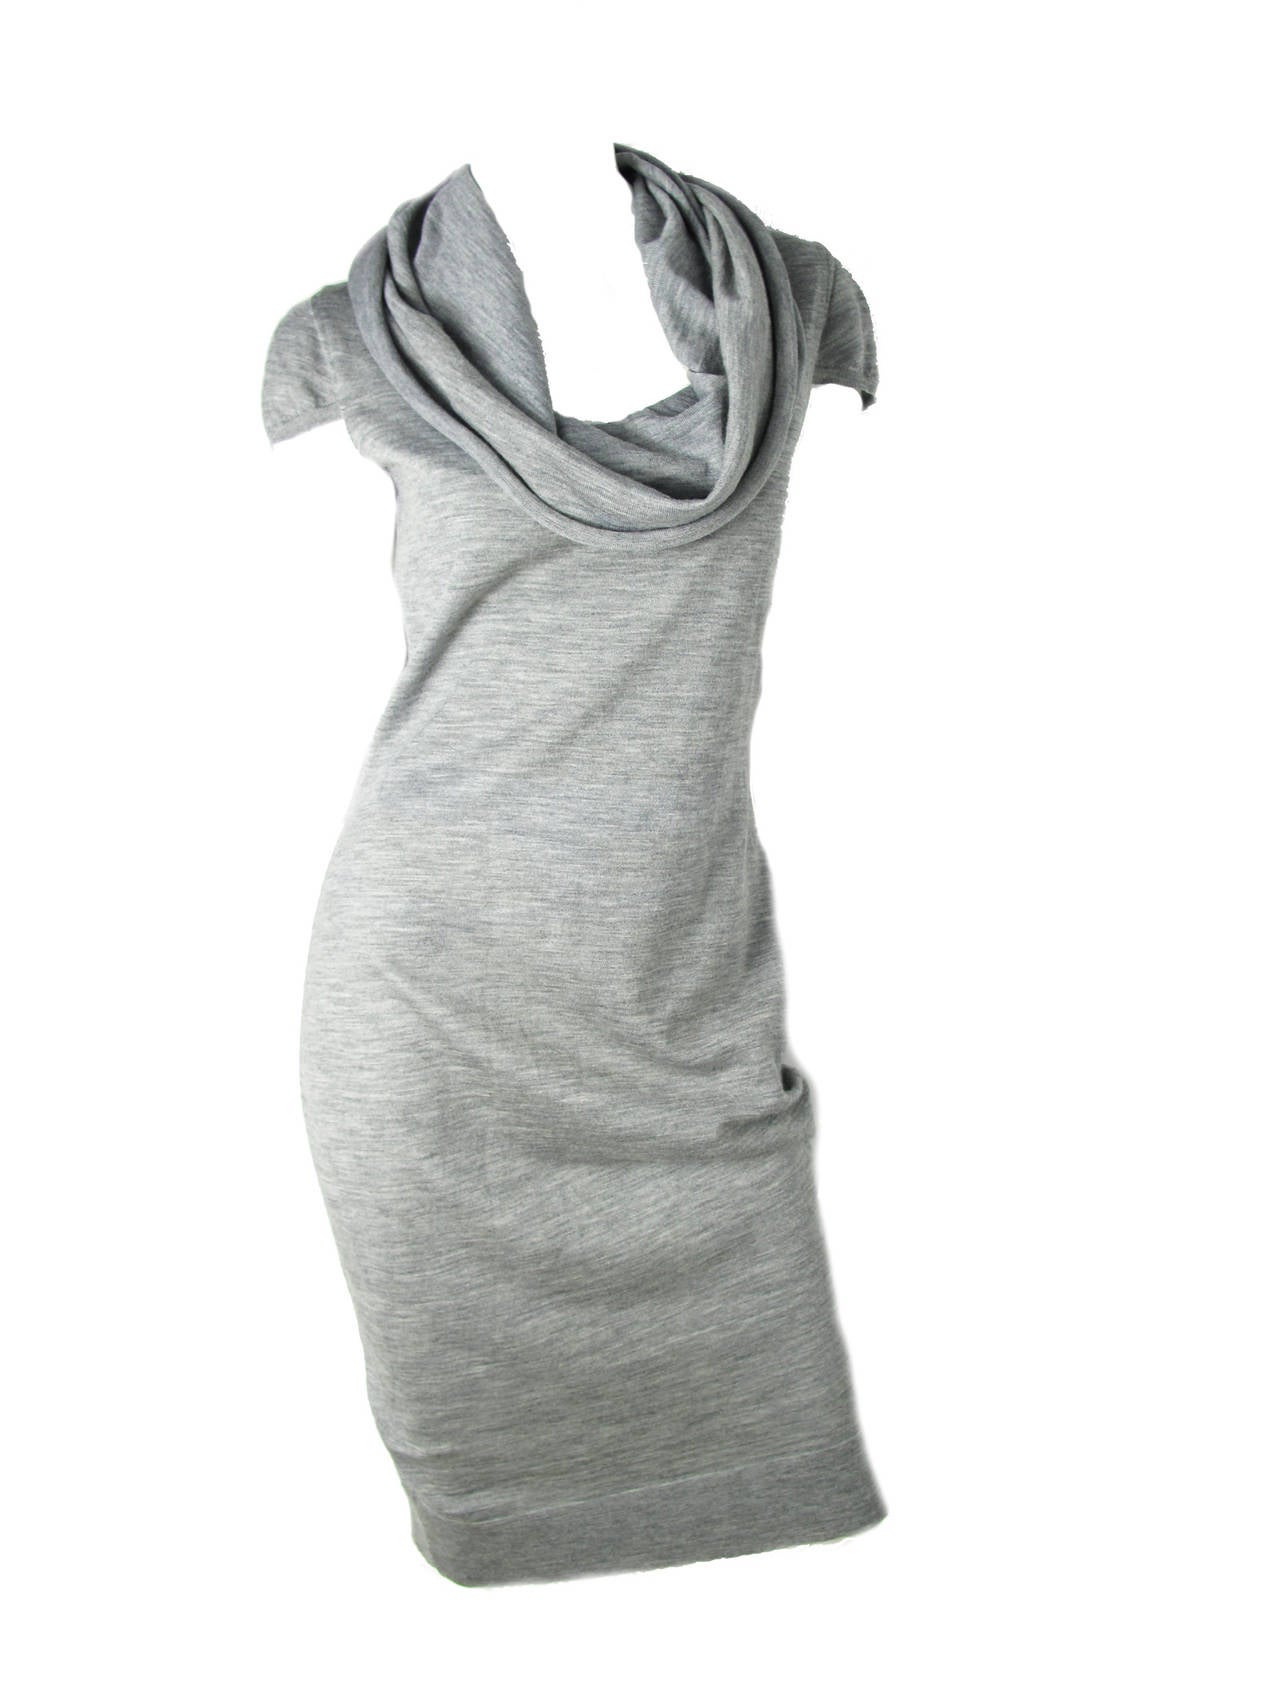 Mcqueen grey light wool dress with large cowl neck.  35